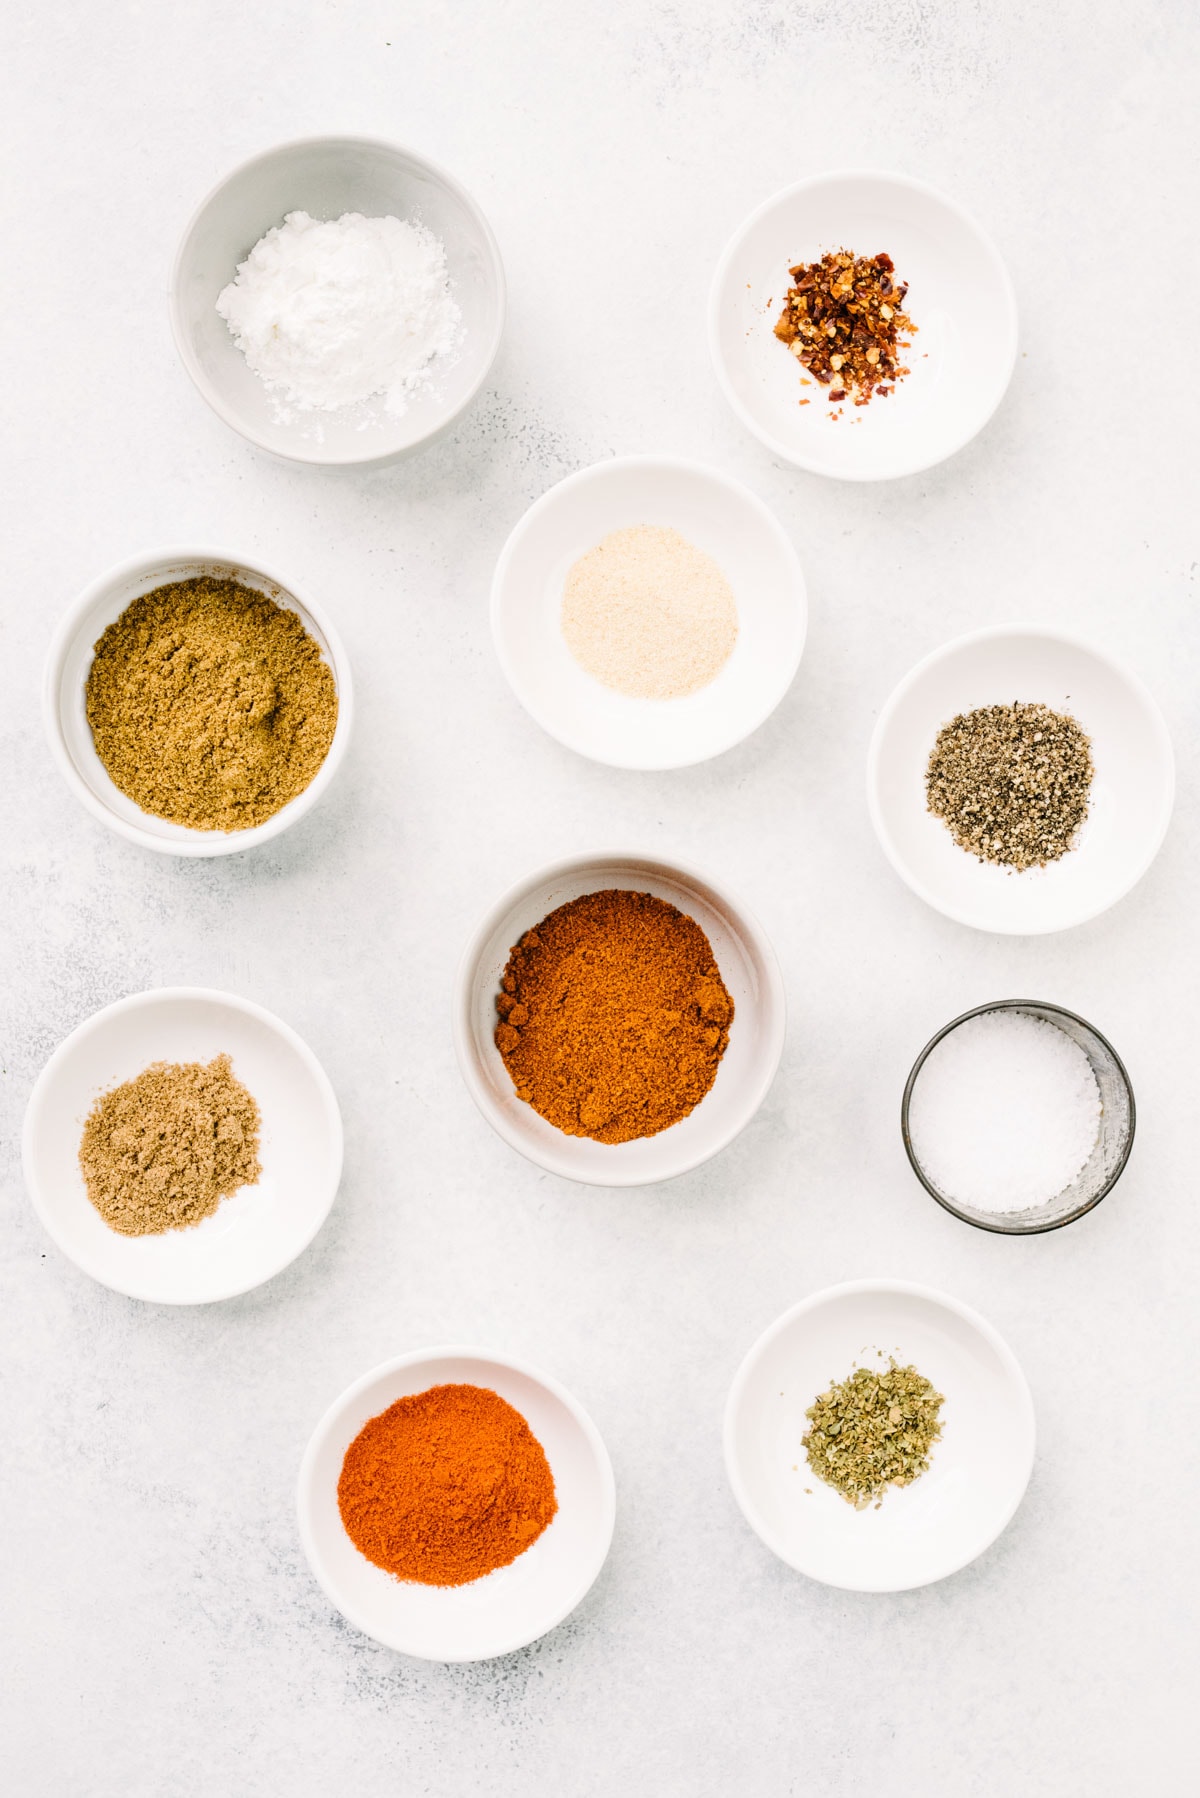 The ingredients for homemade ground beef taco seasoning in small bowls arranged on a concrete background.